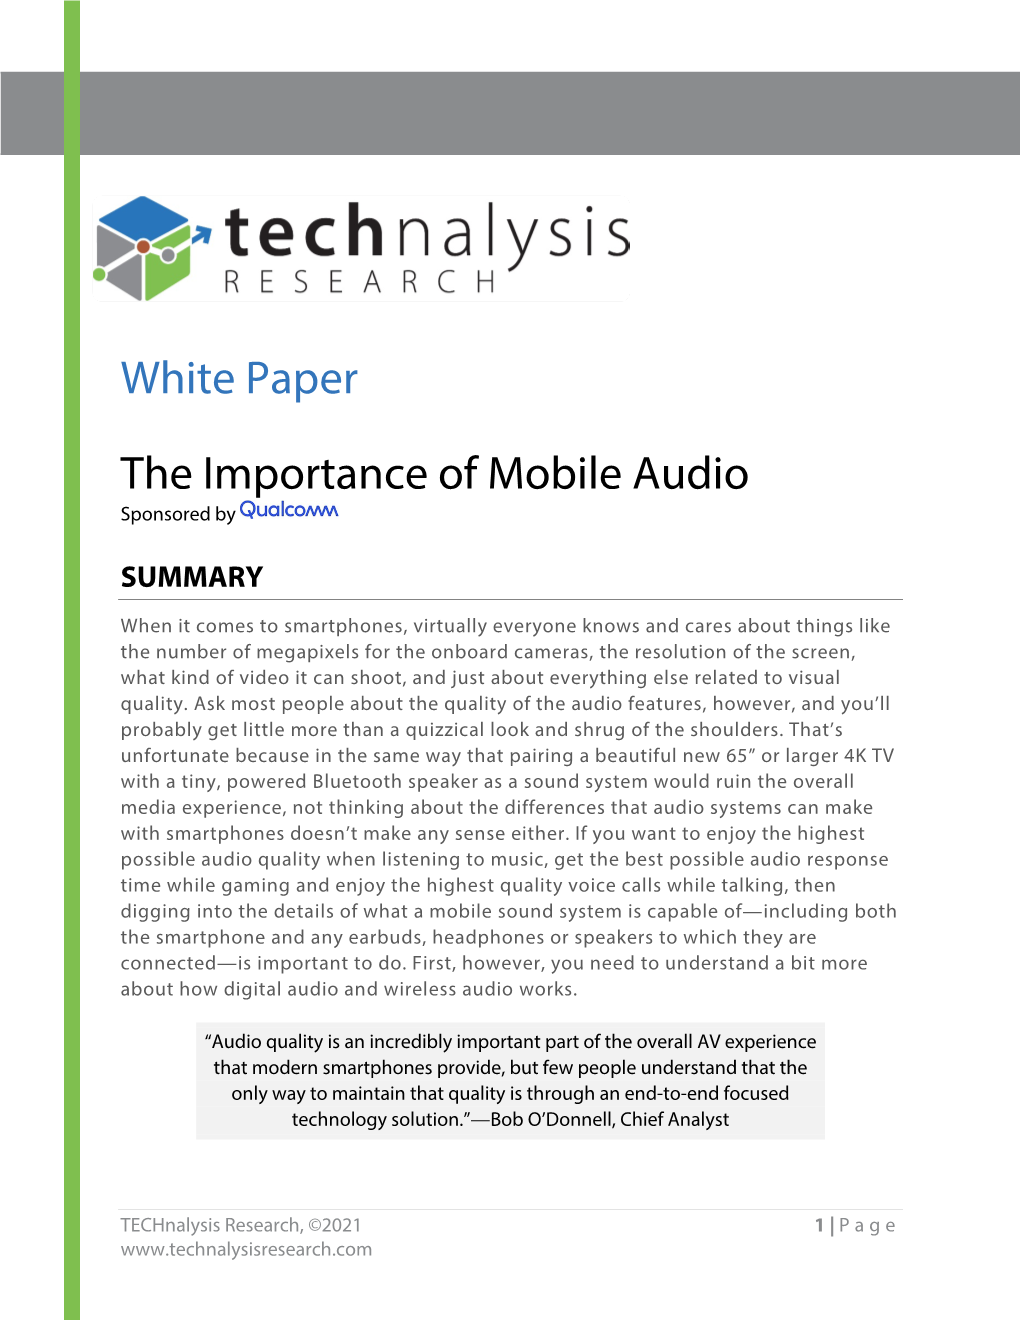 The Importance of Mobile Audio Sponsored By